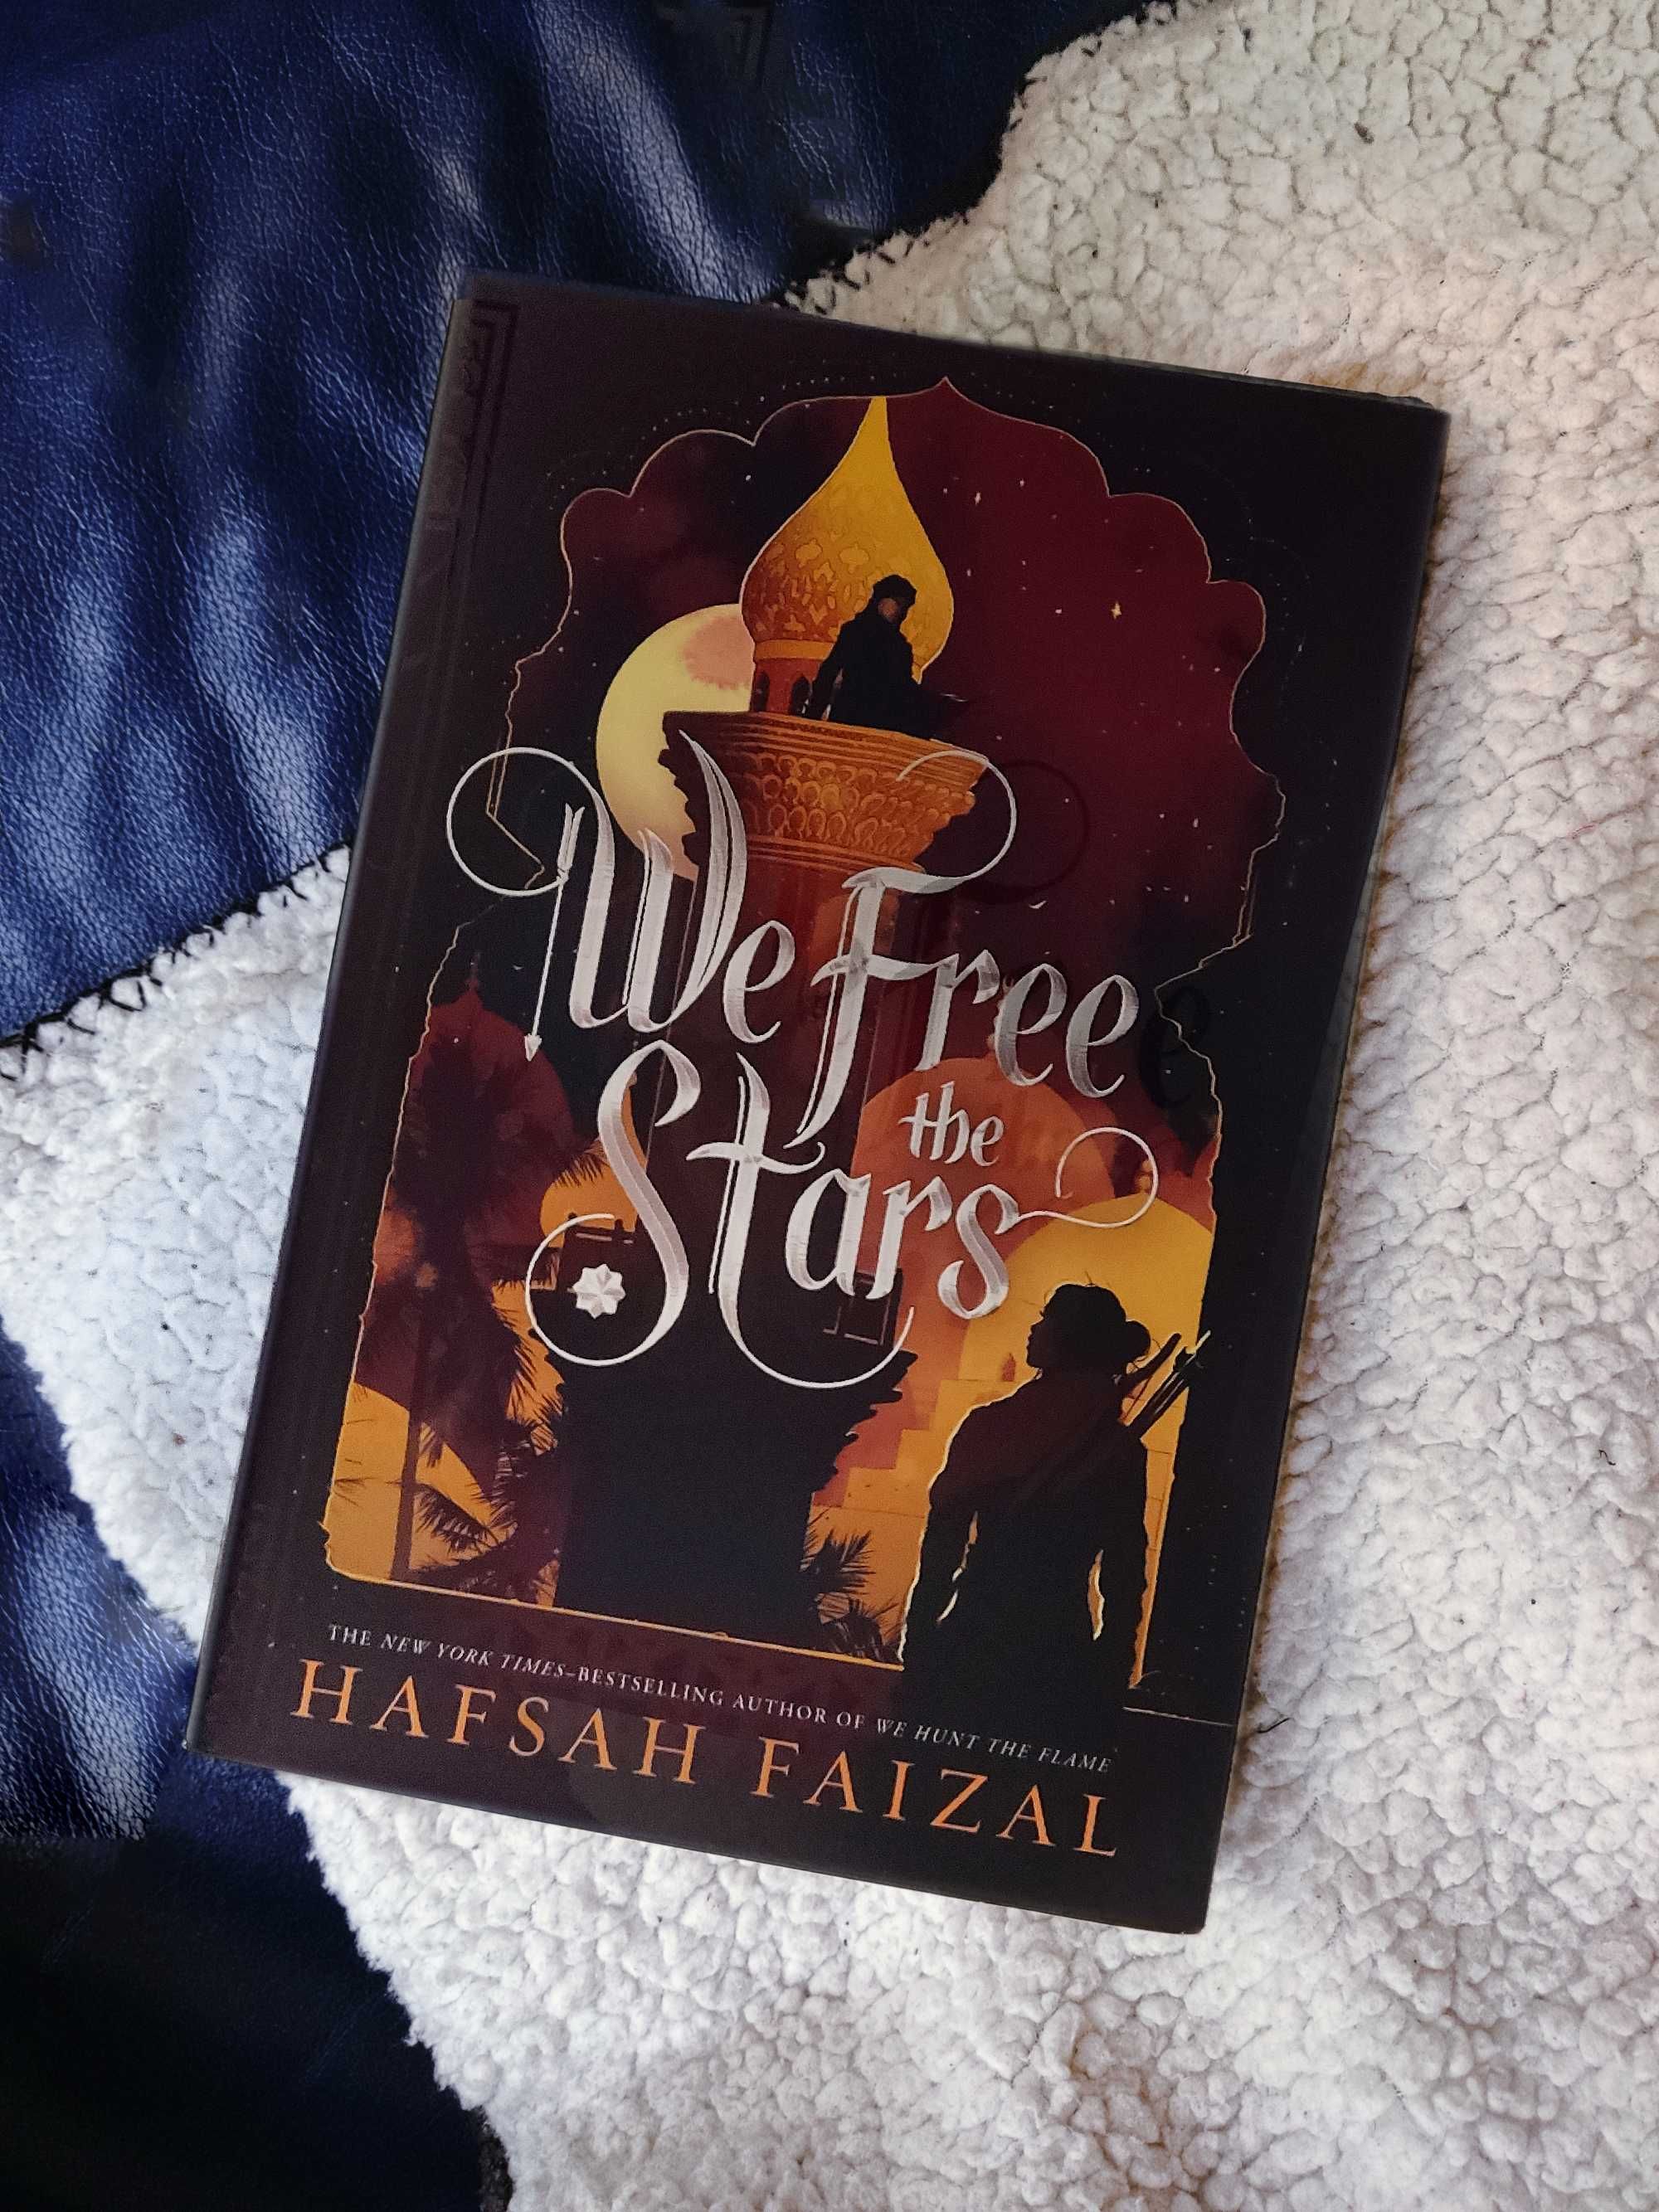 We Hunt the Flame & We Free the Stars by Hafsah Faizal